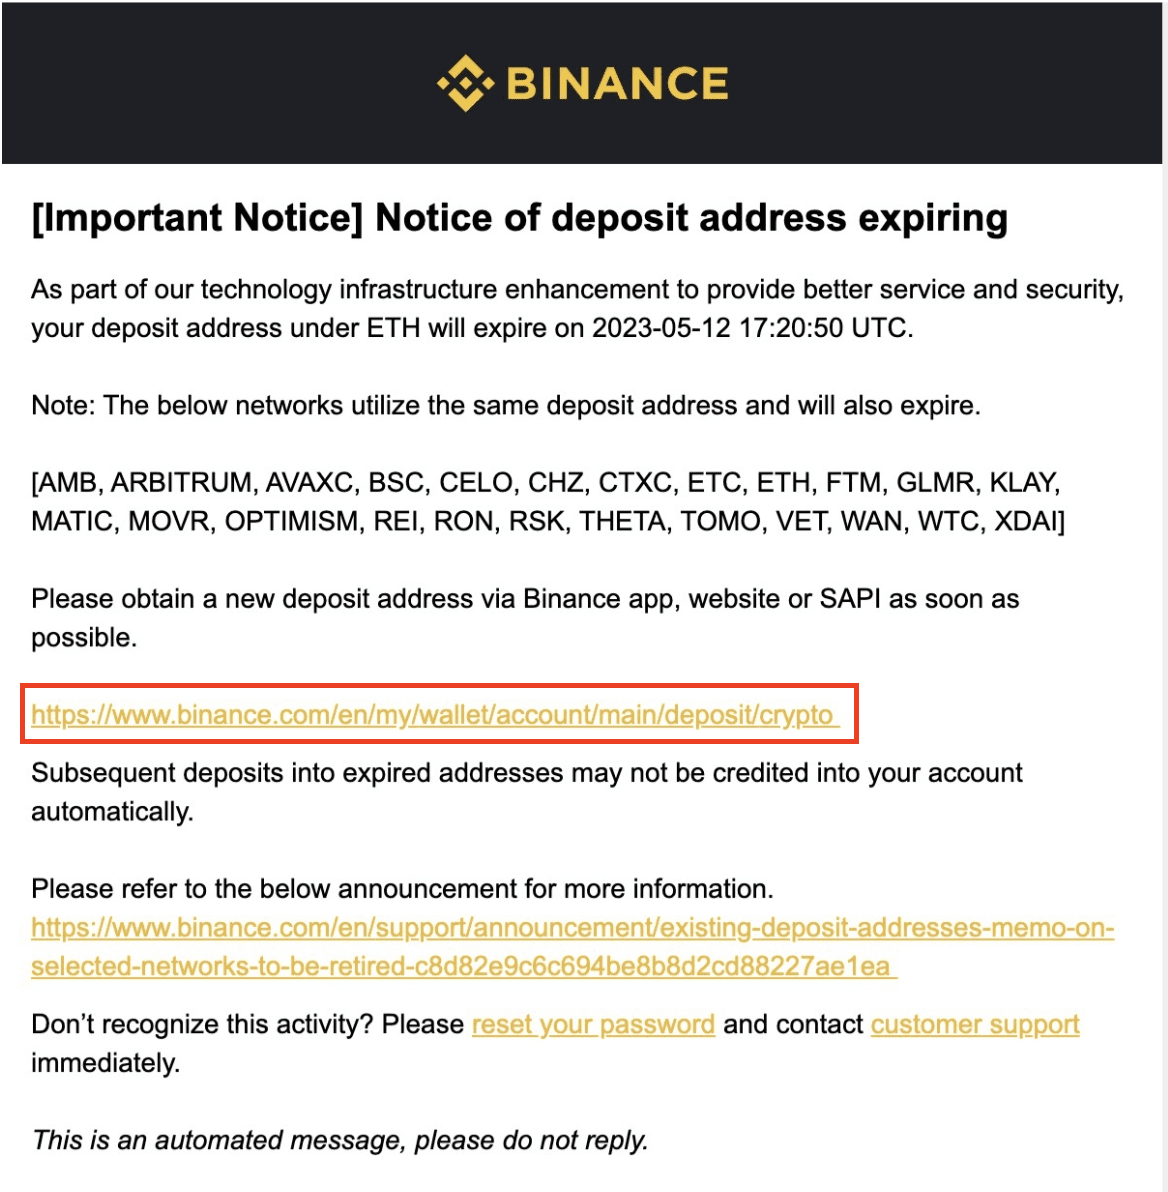 Binance Introduces New Feature Allowing Users to Deposit via Multiple Addresses